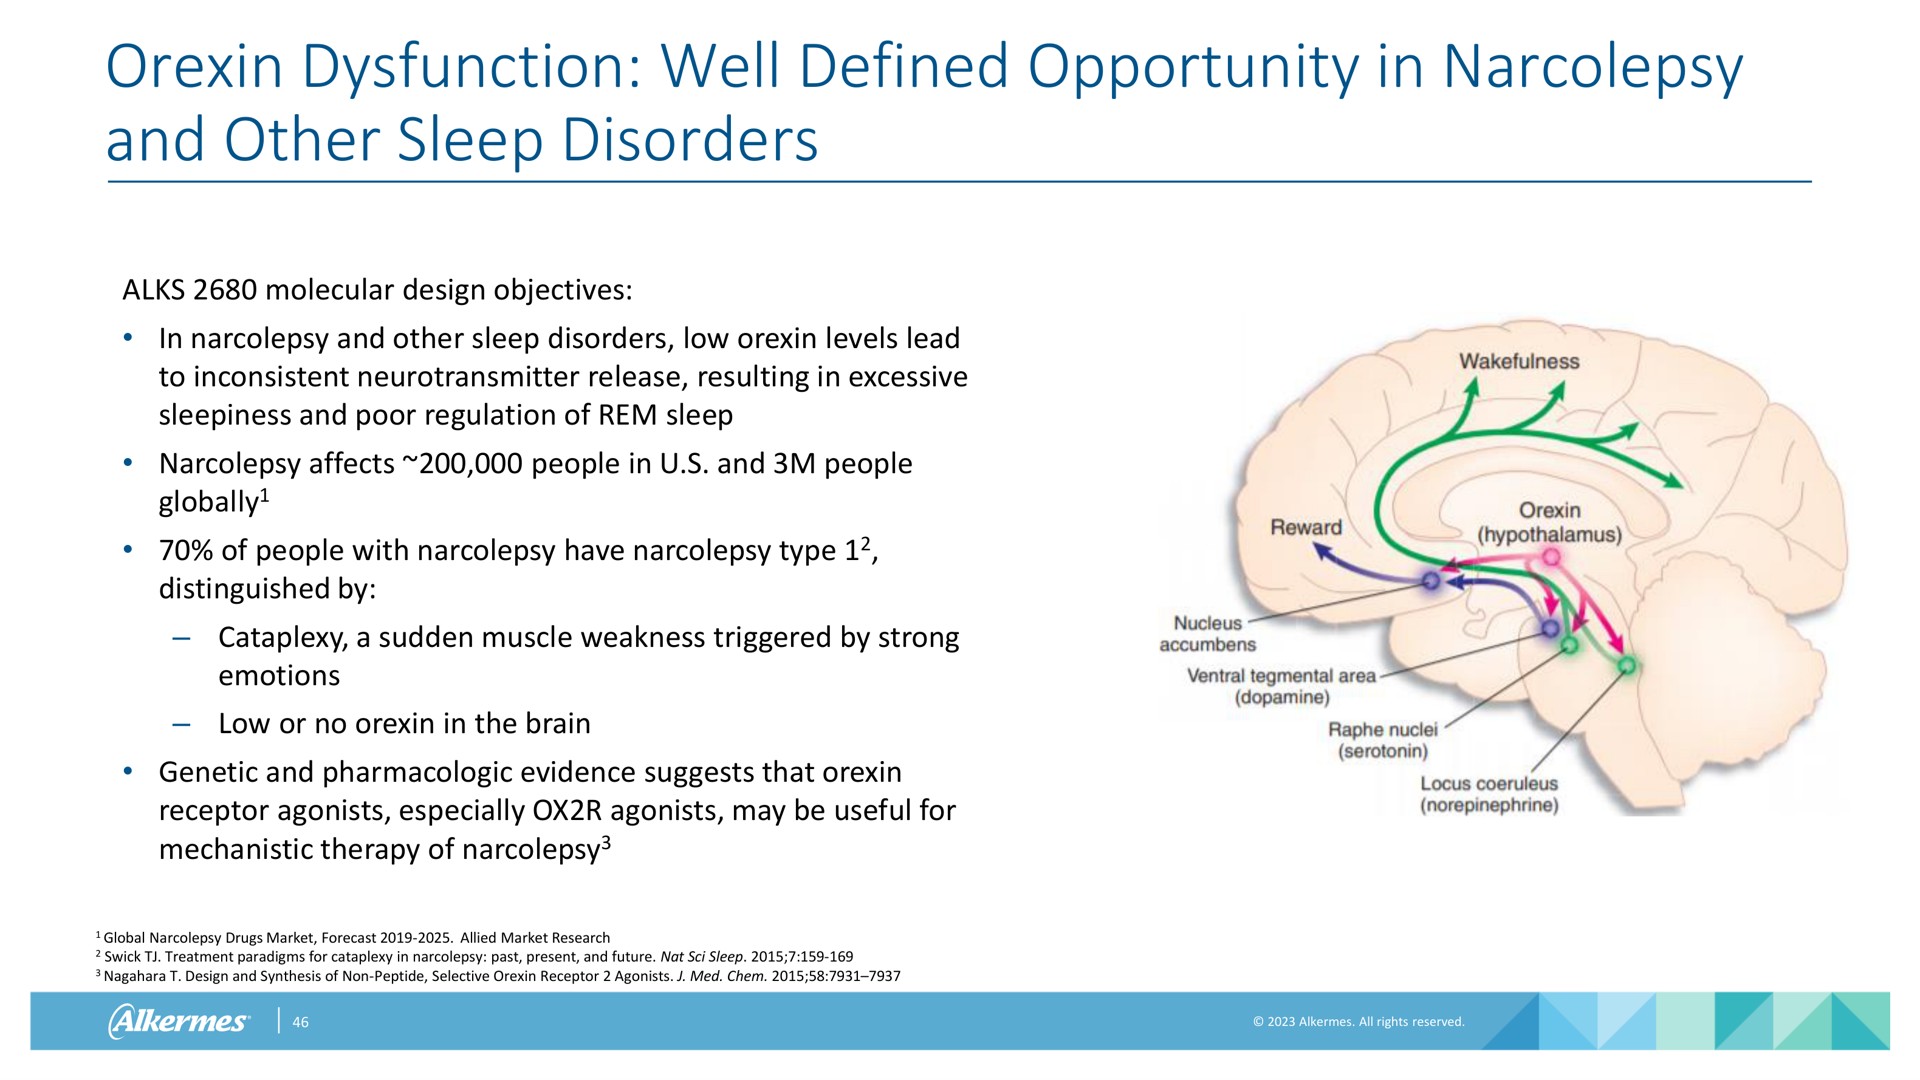 dysfunction well defined opportunity in narcolepsy and other sleep disorders | Alkermes